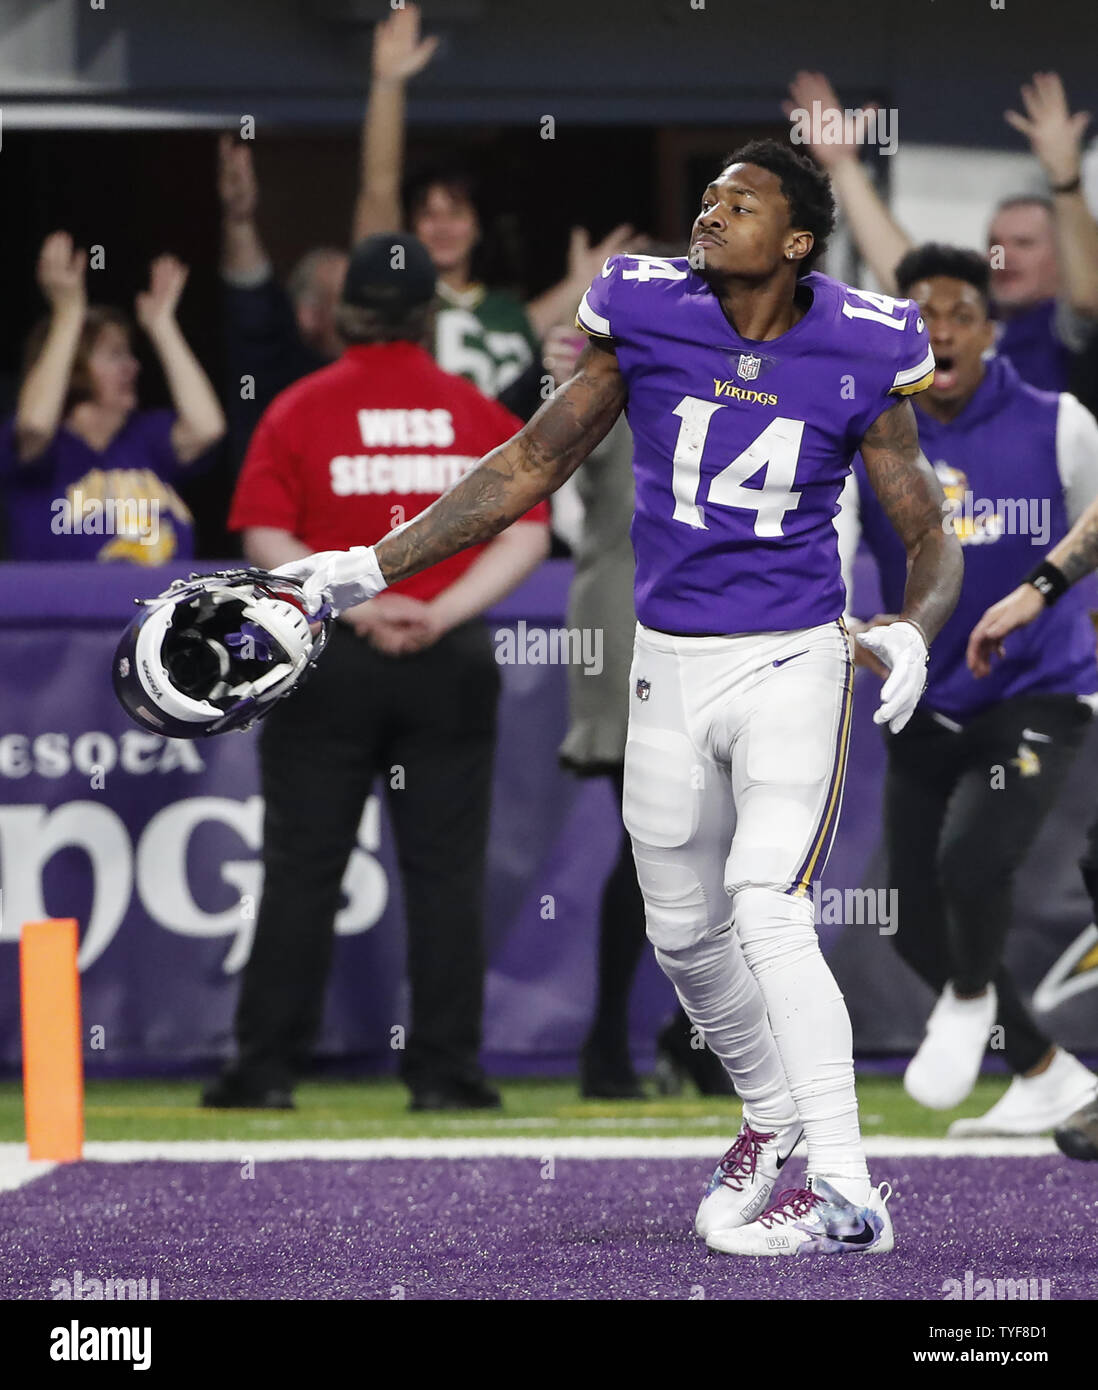 Minnesota Vikings 29 New Orleans Saints 24: Stefon Diggs sends Vikings to  NFC Championship game with incredible last-ditch touchdown after thrilling  encounter